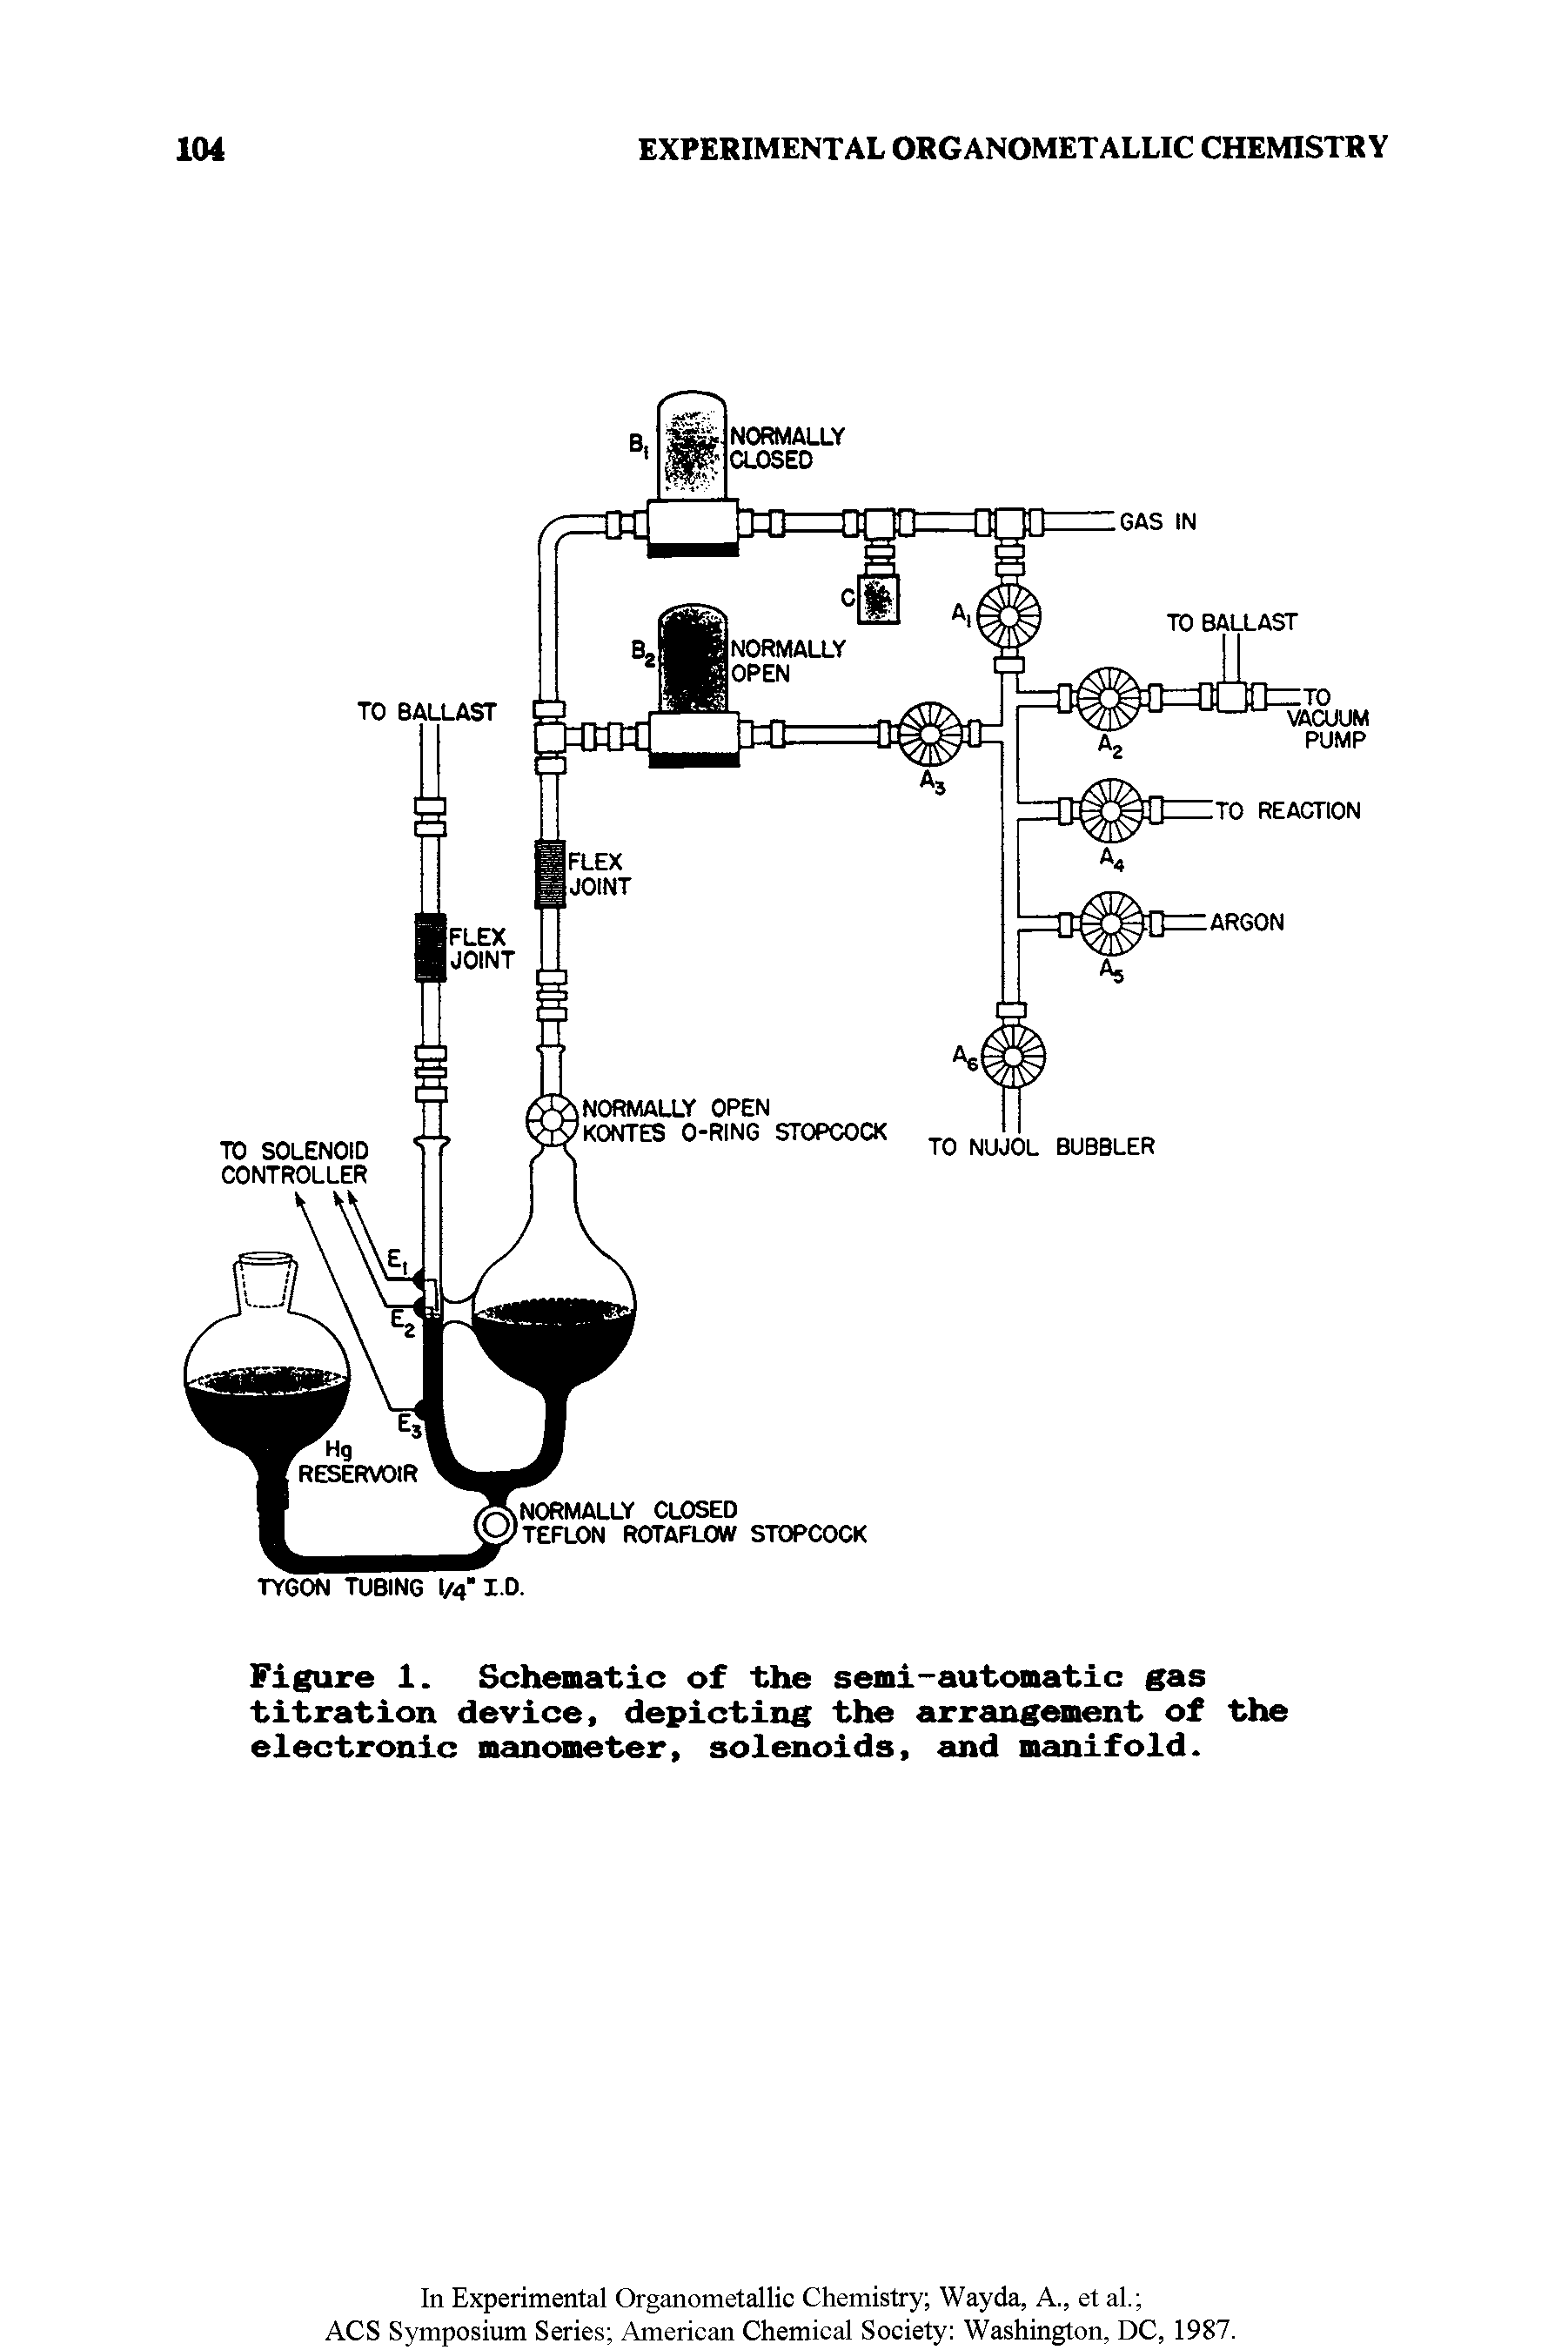 Figure 1. Schematic of the semi-automatic gas titration device, depicting the arrangement of the electronic manometer, solenoids, and manifold.